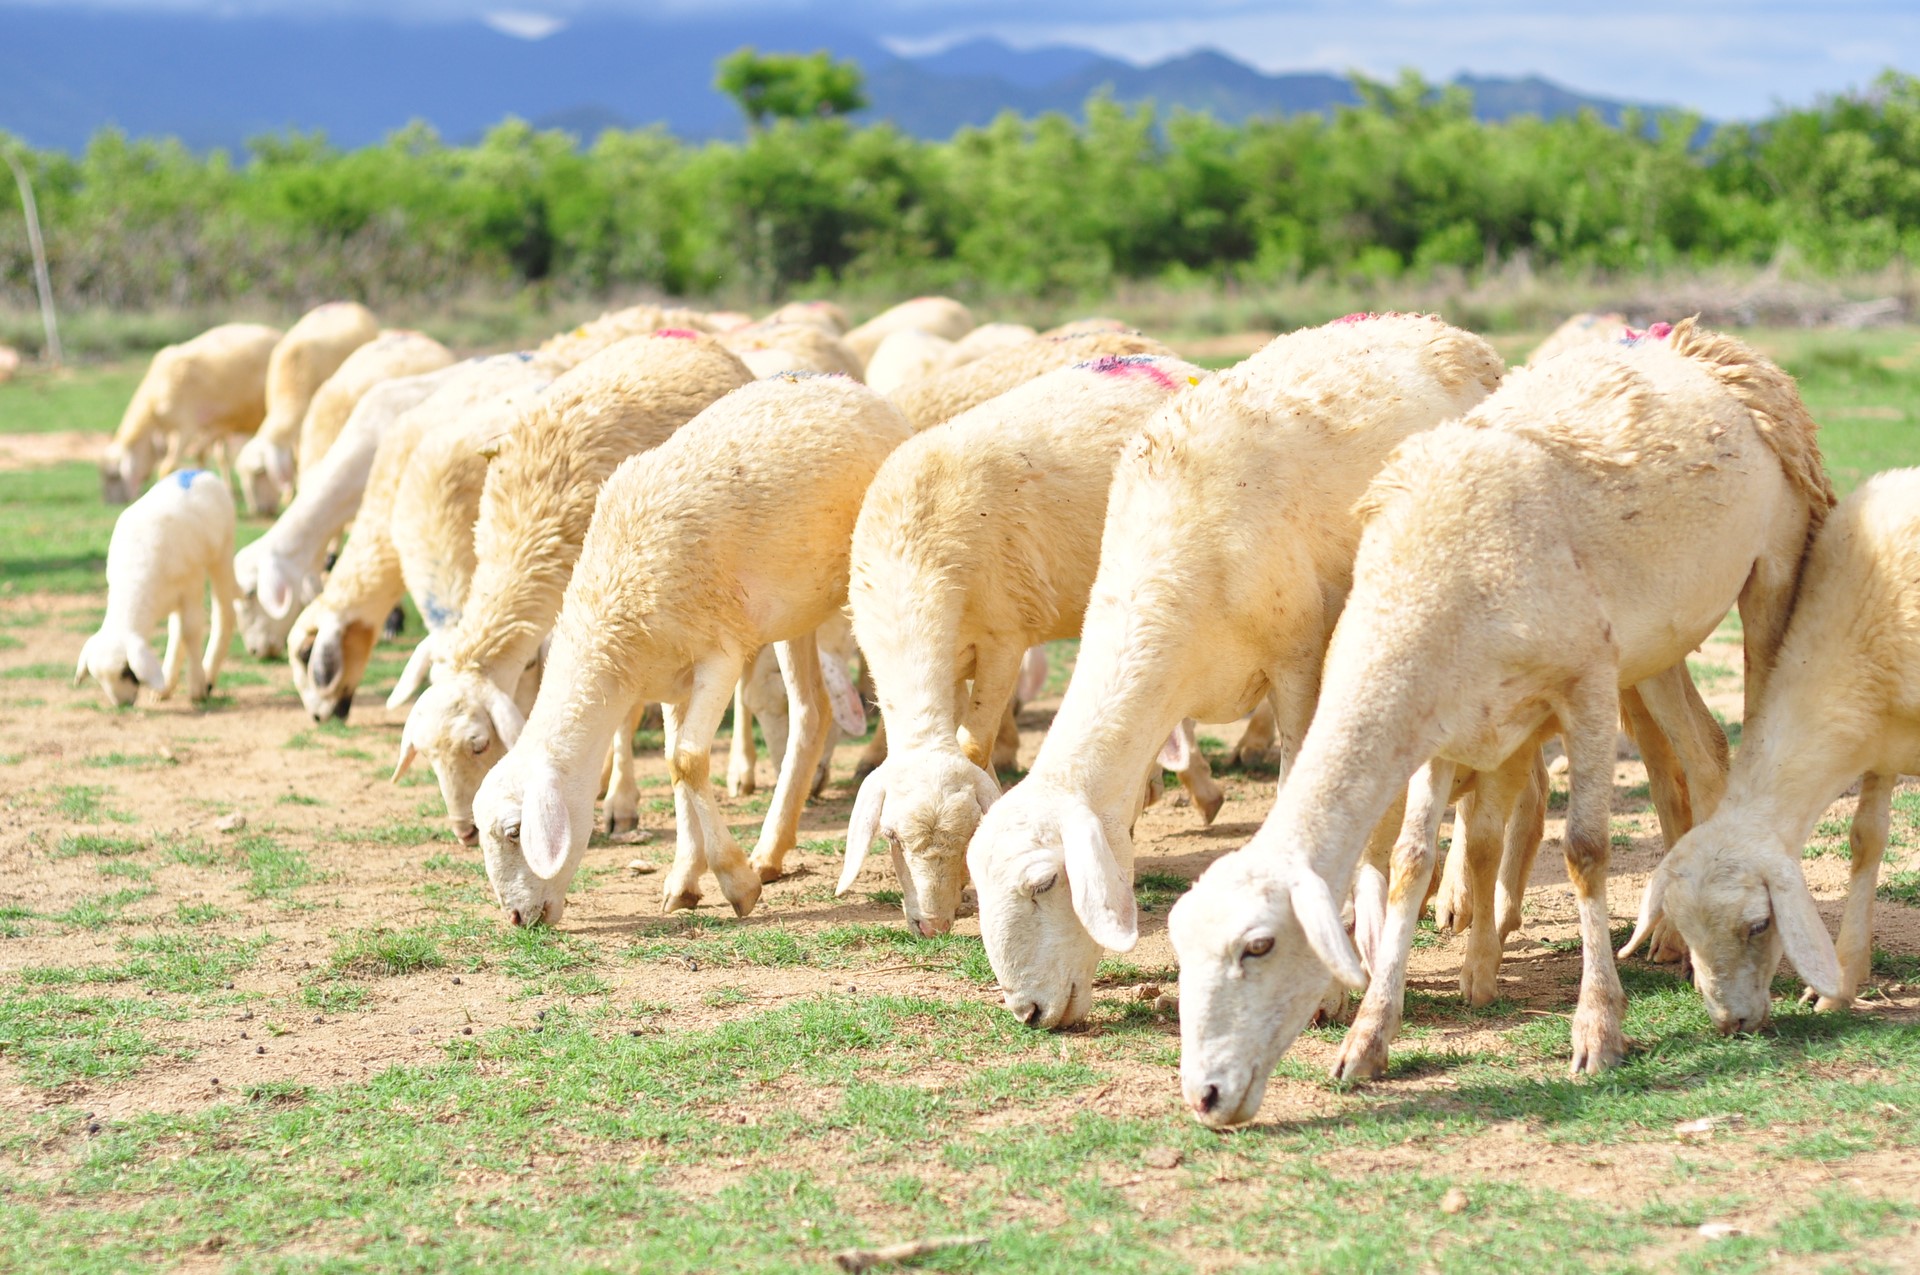 Applying software in livestock farming helps the Ninh Thuan functional branch accurately know herd fluctuations and well control disease epidemics. Photo: Mai Phuong.